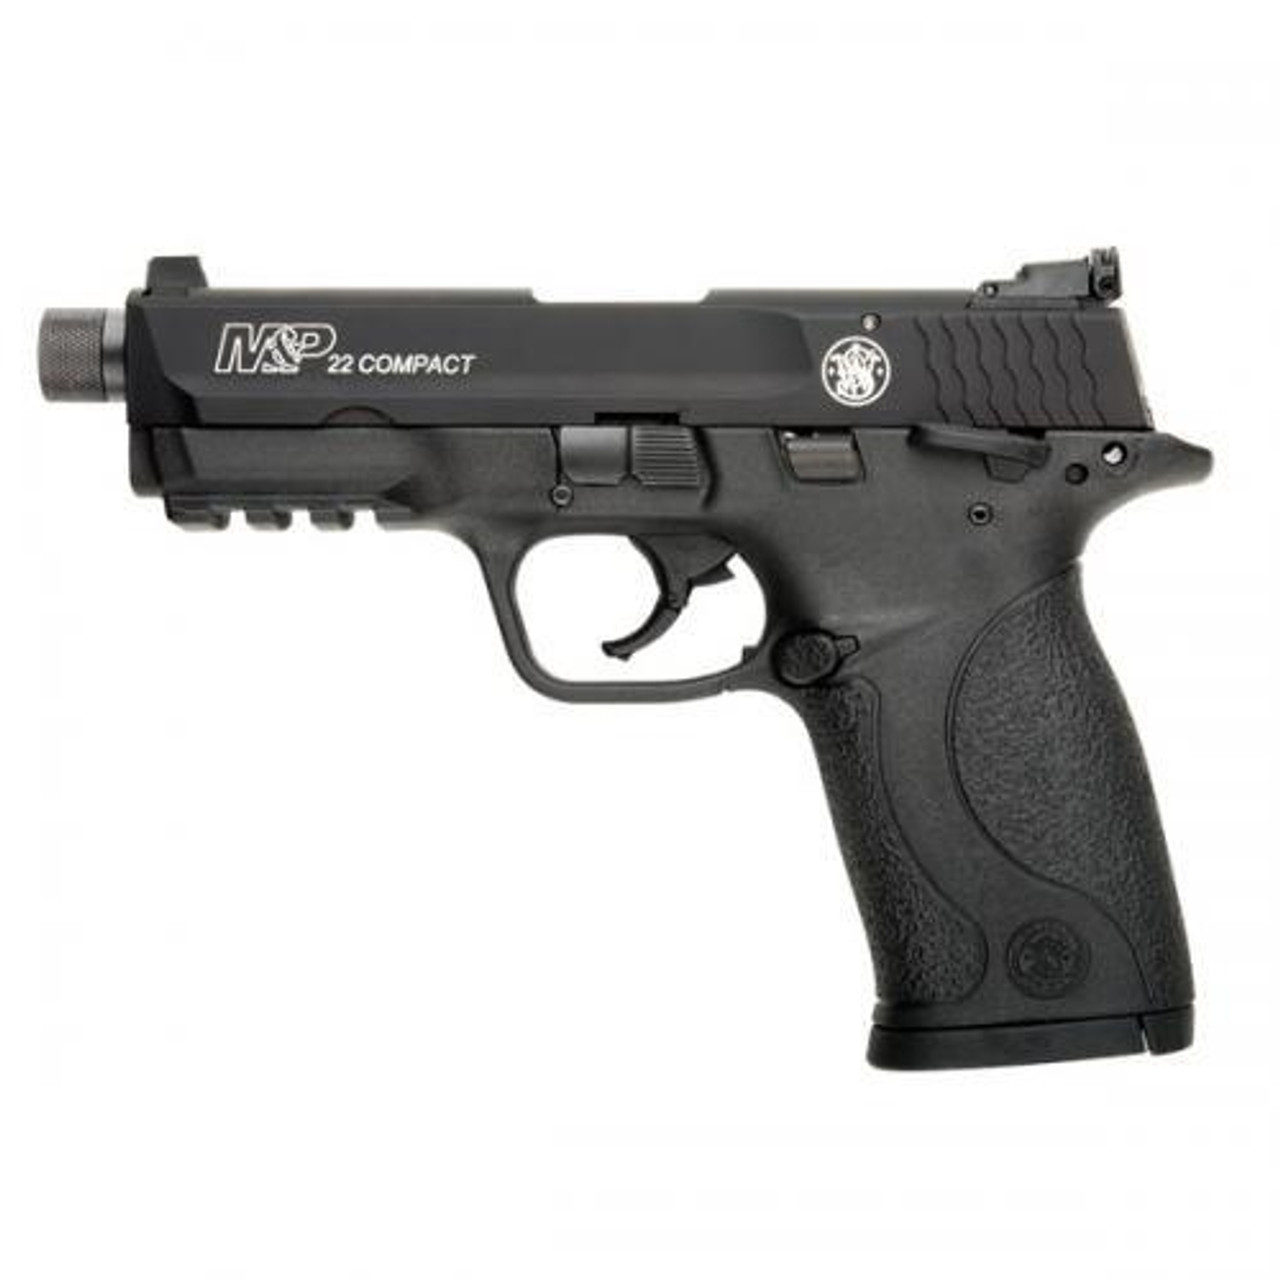 SMITH AND WESSON M&P22 COMPACT THREADED BARREL 22 LR 10199